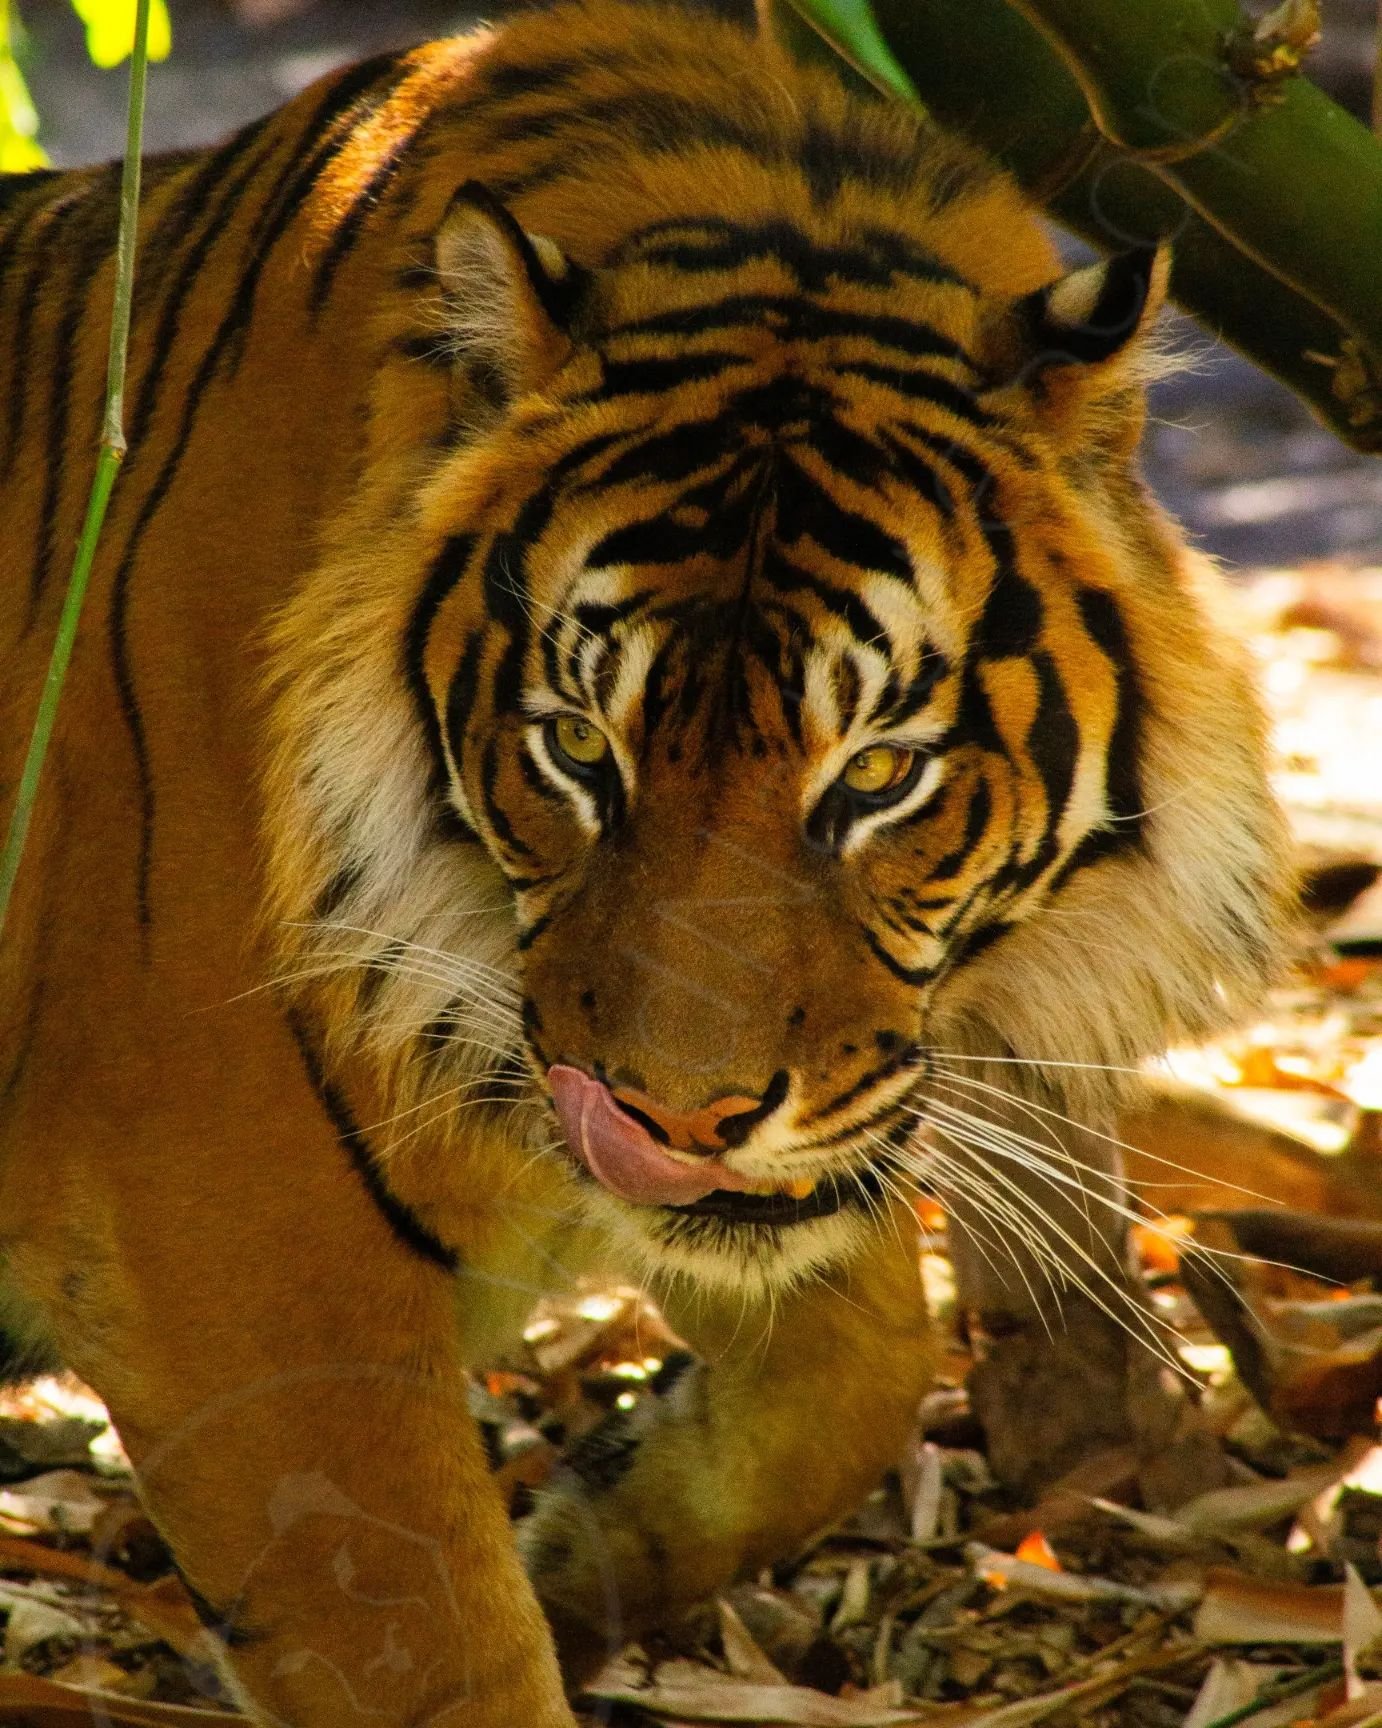 The Sumatran Tiger is one of the six surviving tiger species, with three species being officially extinct. Sumatran Tigers are one of the smallest tigers, have darker fur, and broader stripes than any other existing tiger species. Unfortunately this 